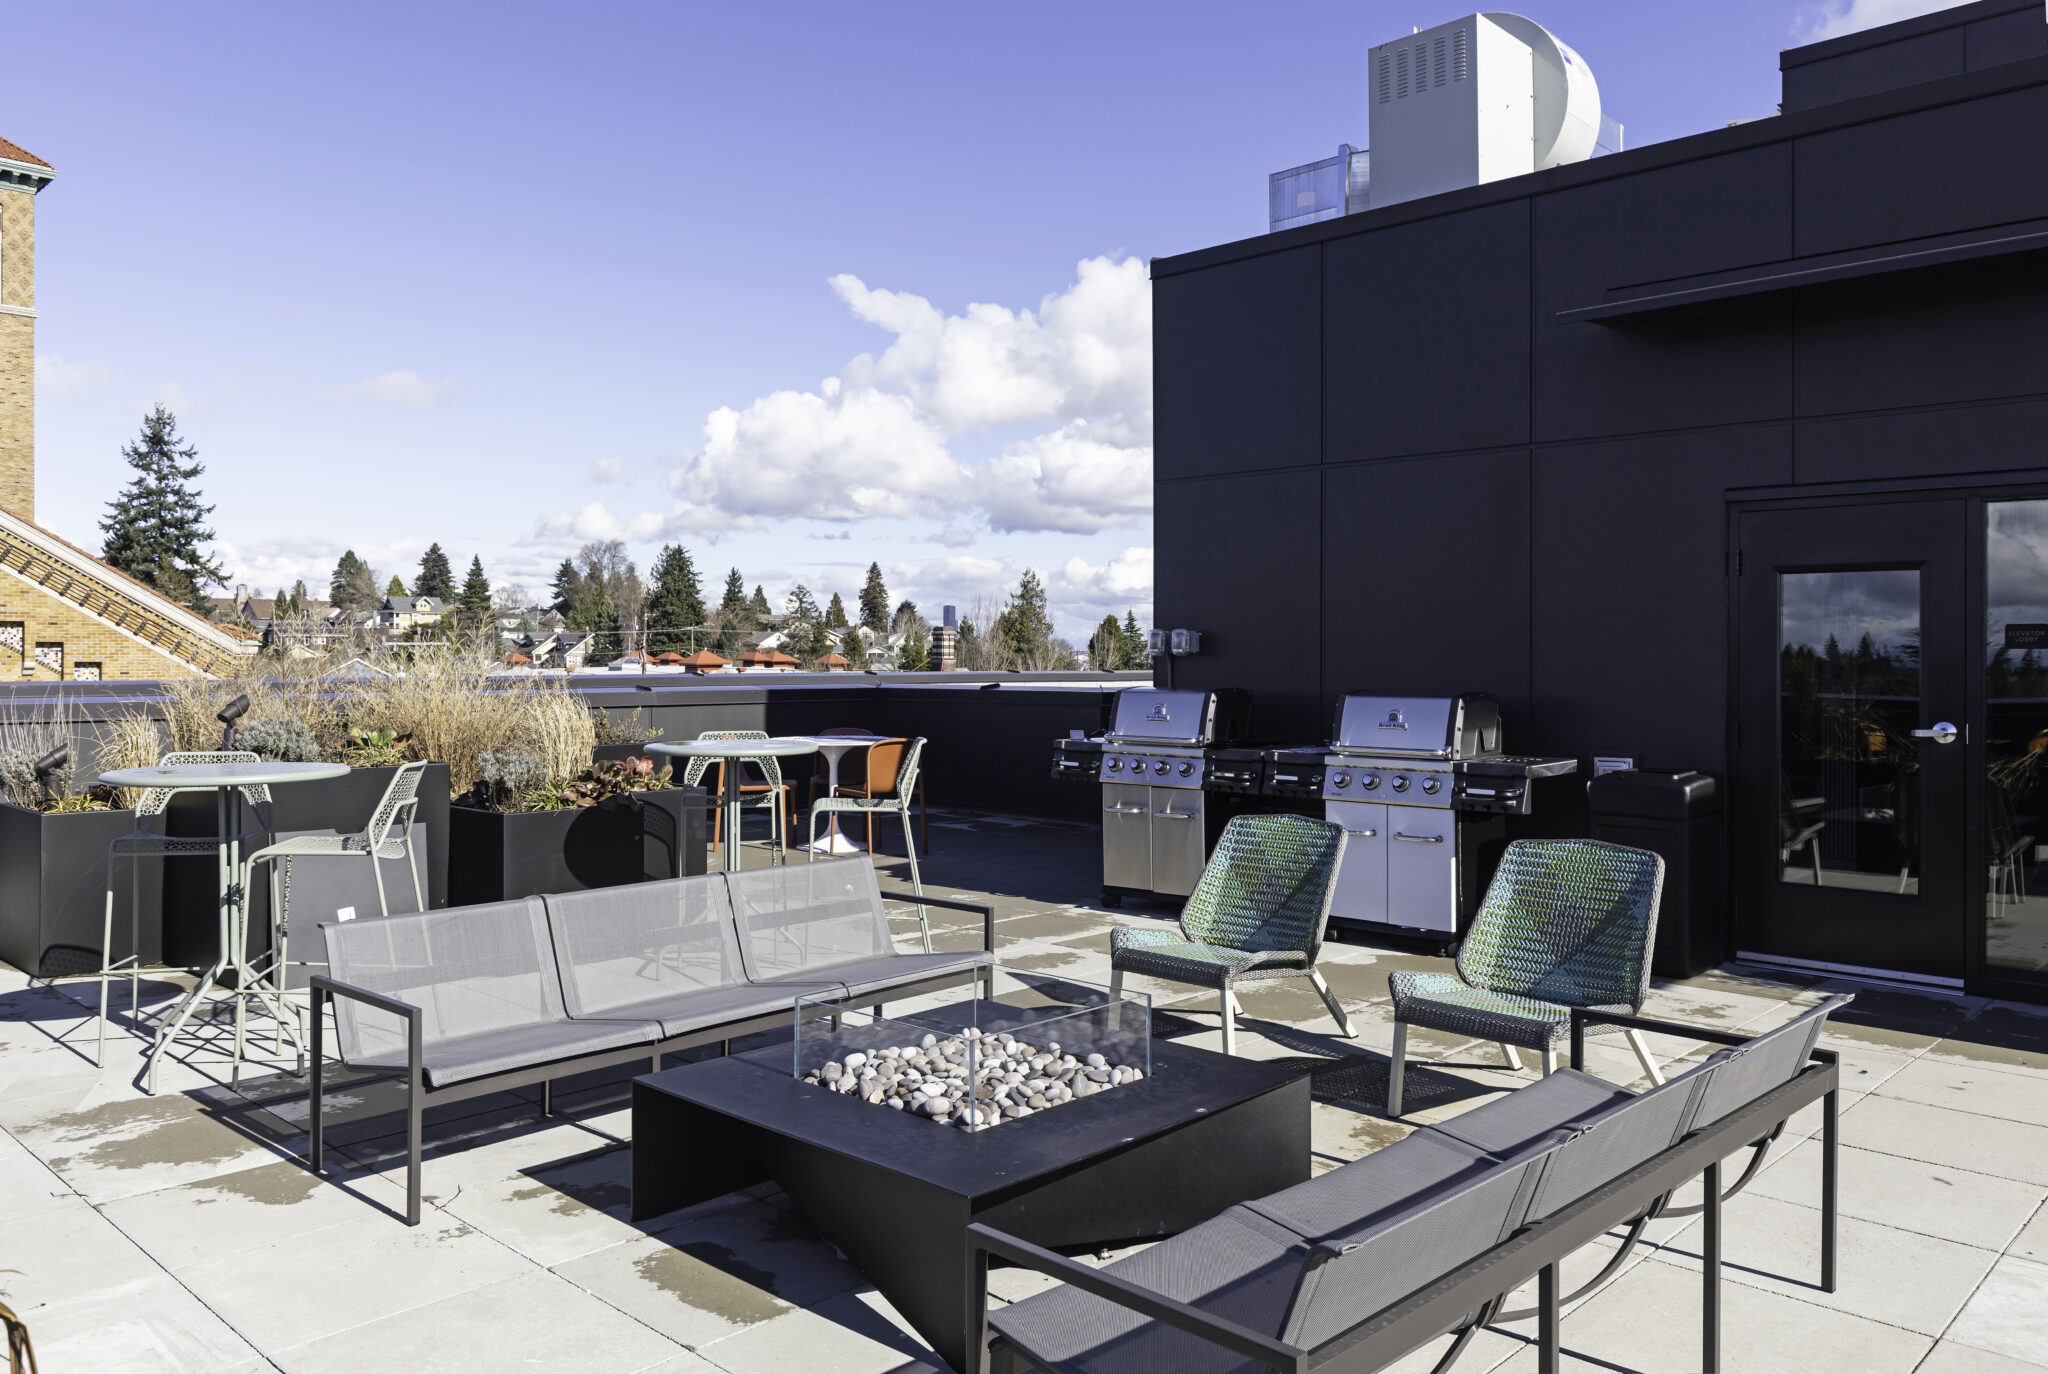 Basalt west seattle rooftop deck with bbq area